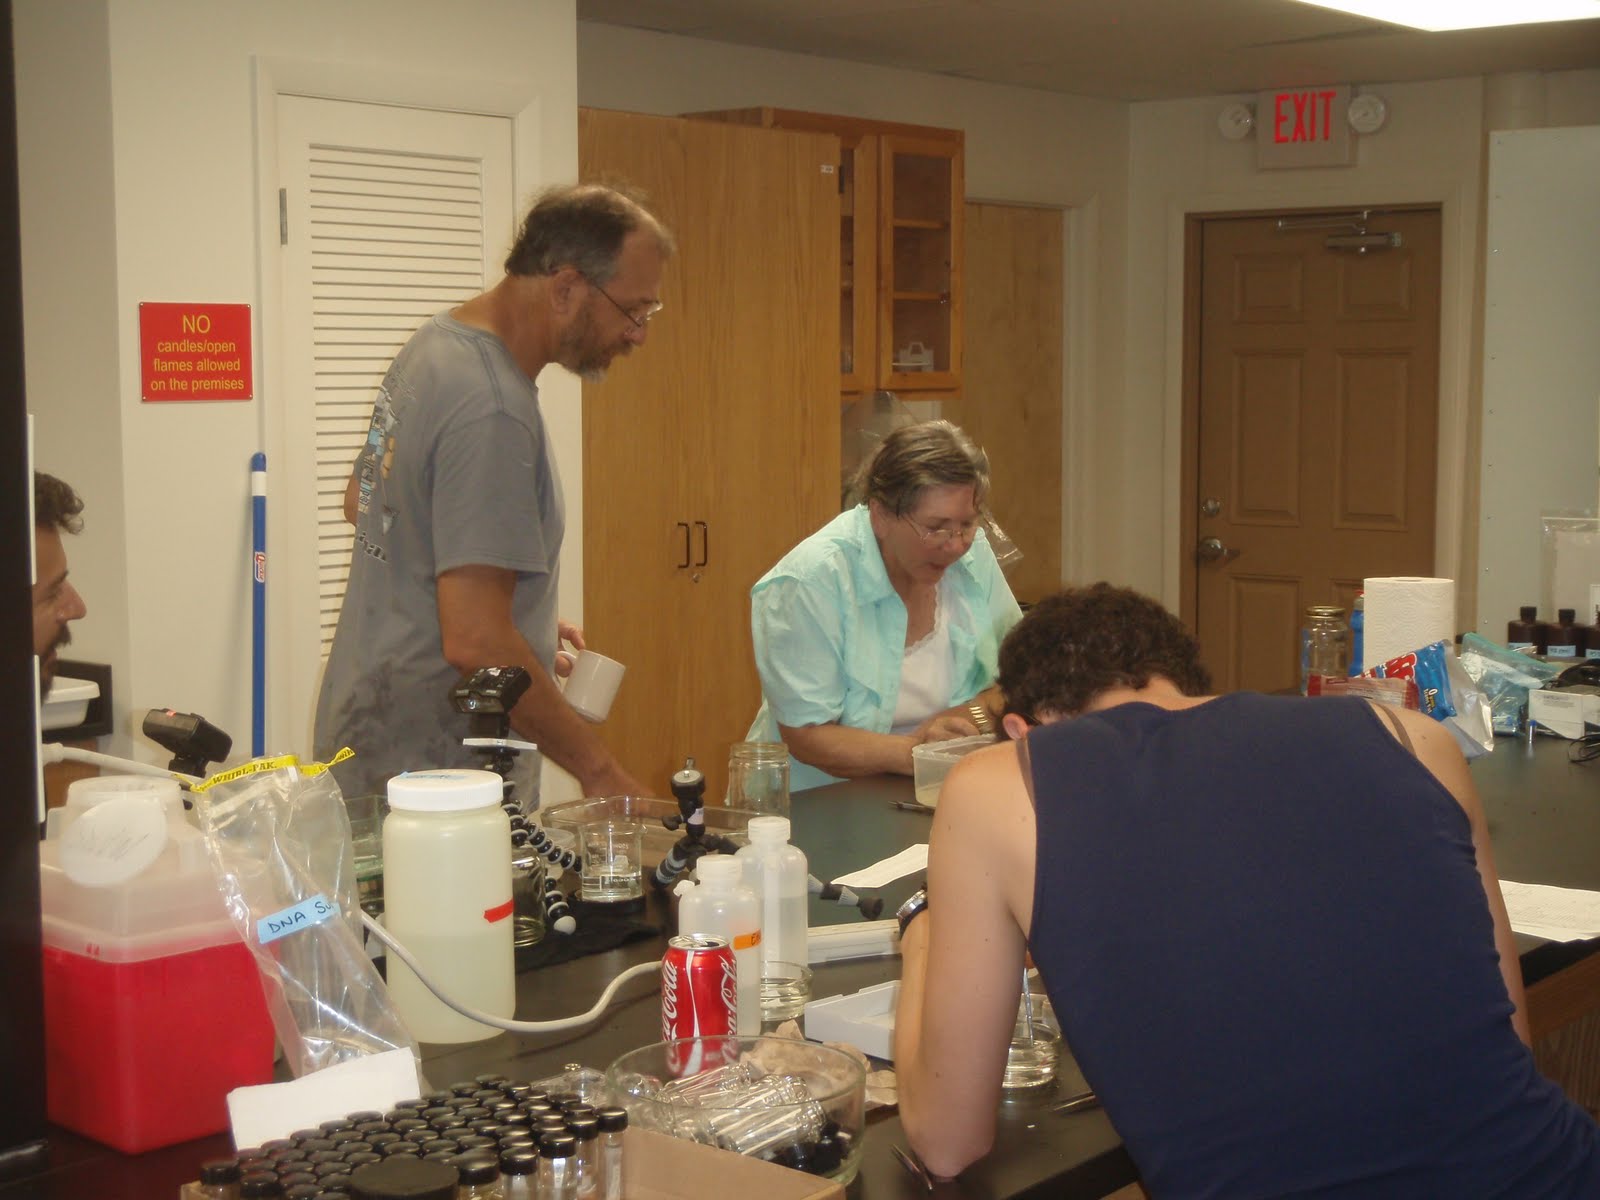 Gustav, Anne, and Jenna working in the lab